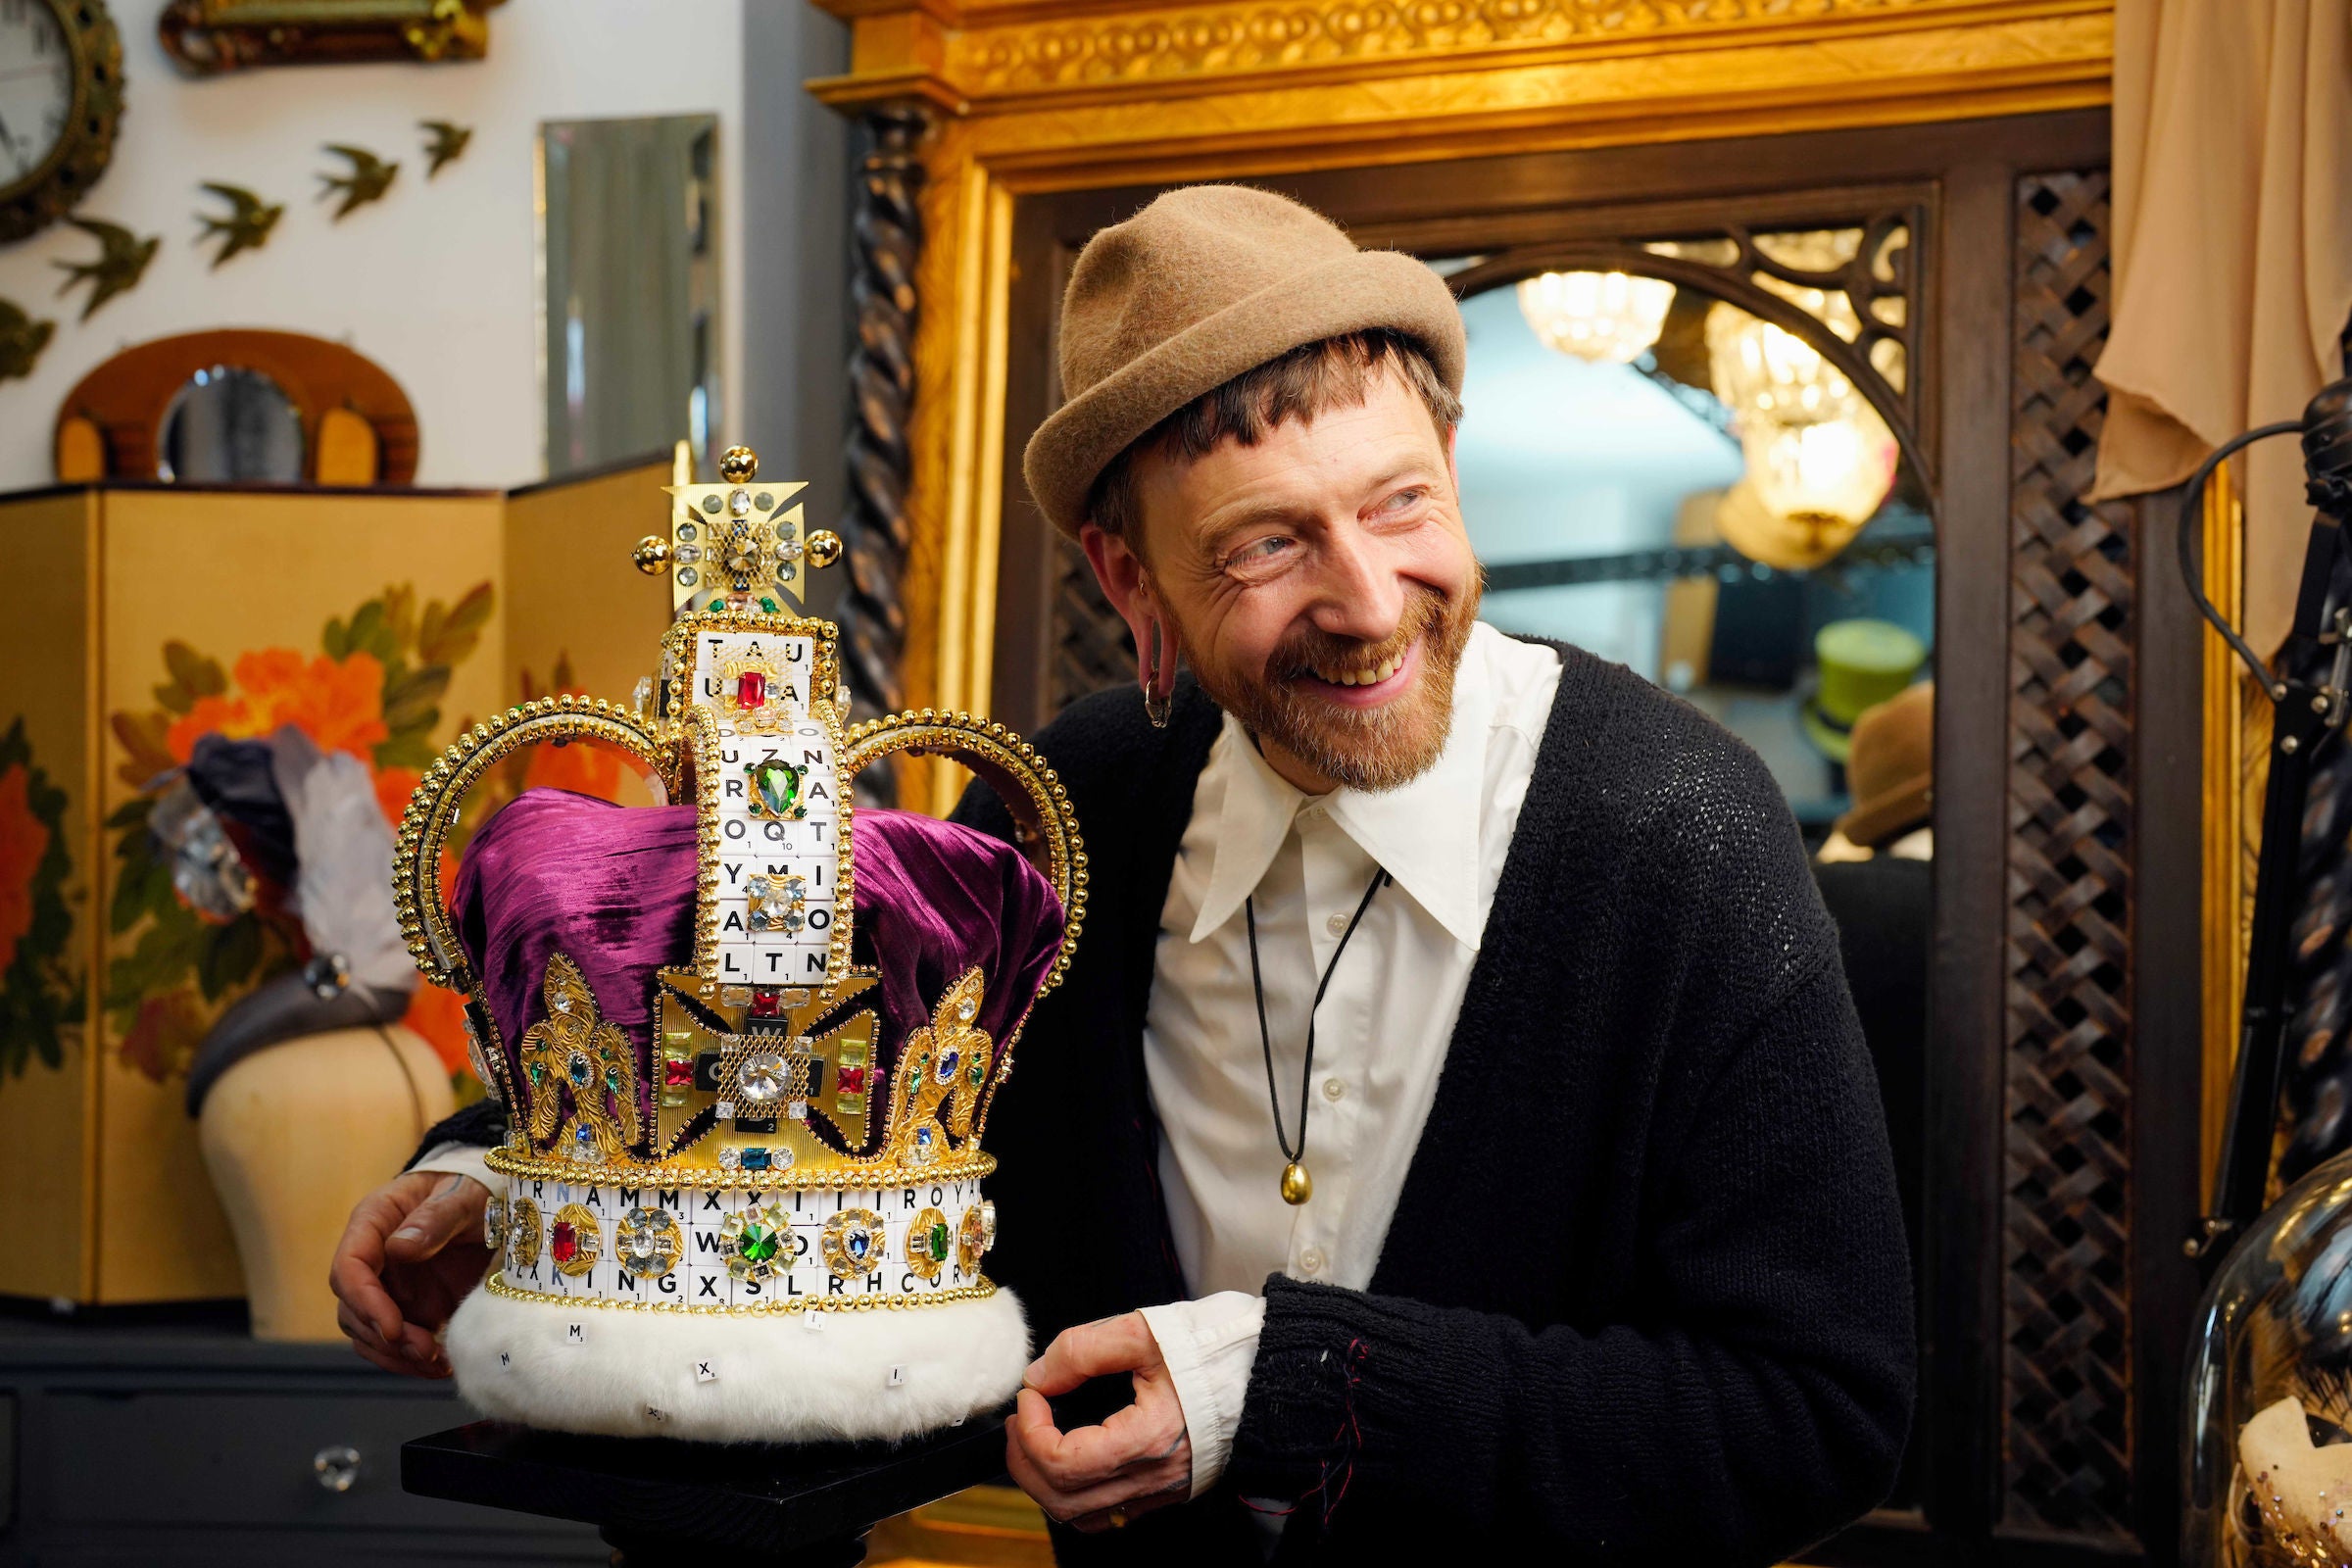 British milliner Justin Smith with a crown he has created using 319 Scrabble tiles